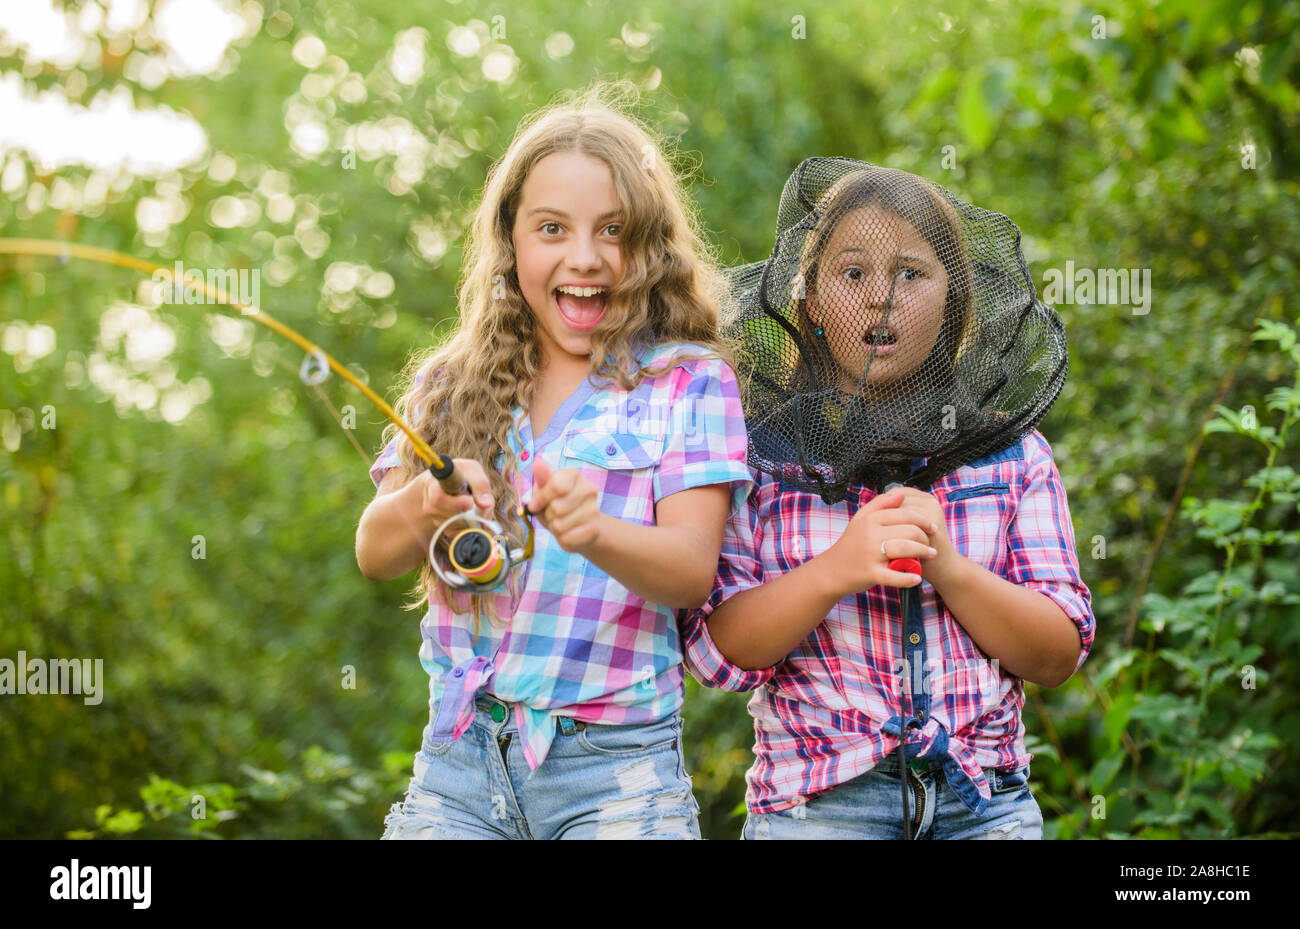 https://c8.alamy.com/comp/2A8HC1E/we-have-caught-it-kids-spend-time-in-camp-having-fun-fish-angler-two-girls-fishing-big-game-fishing-summer-hobby-happy-children-with-net-and-ro-2A8HC1E.jpg